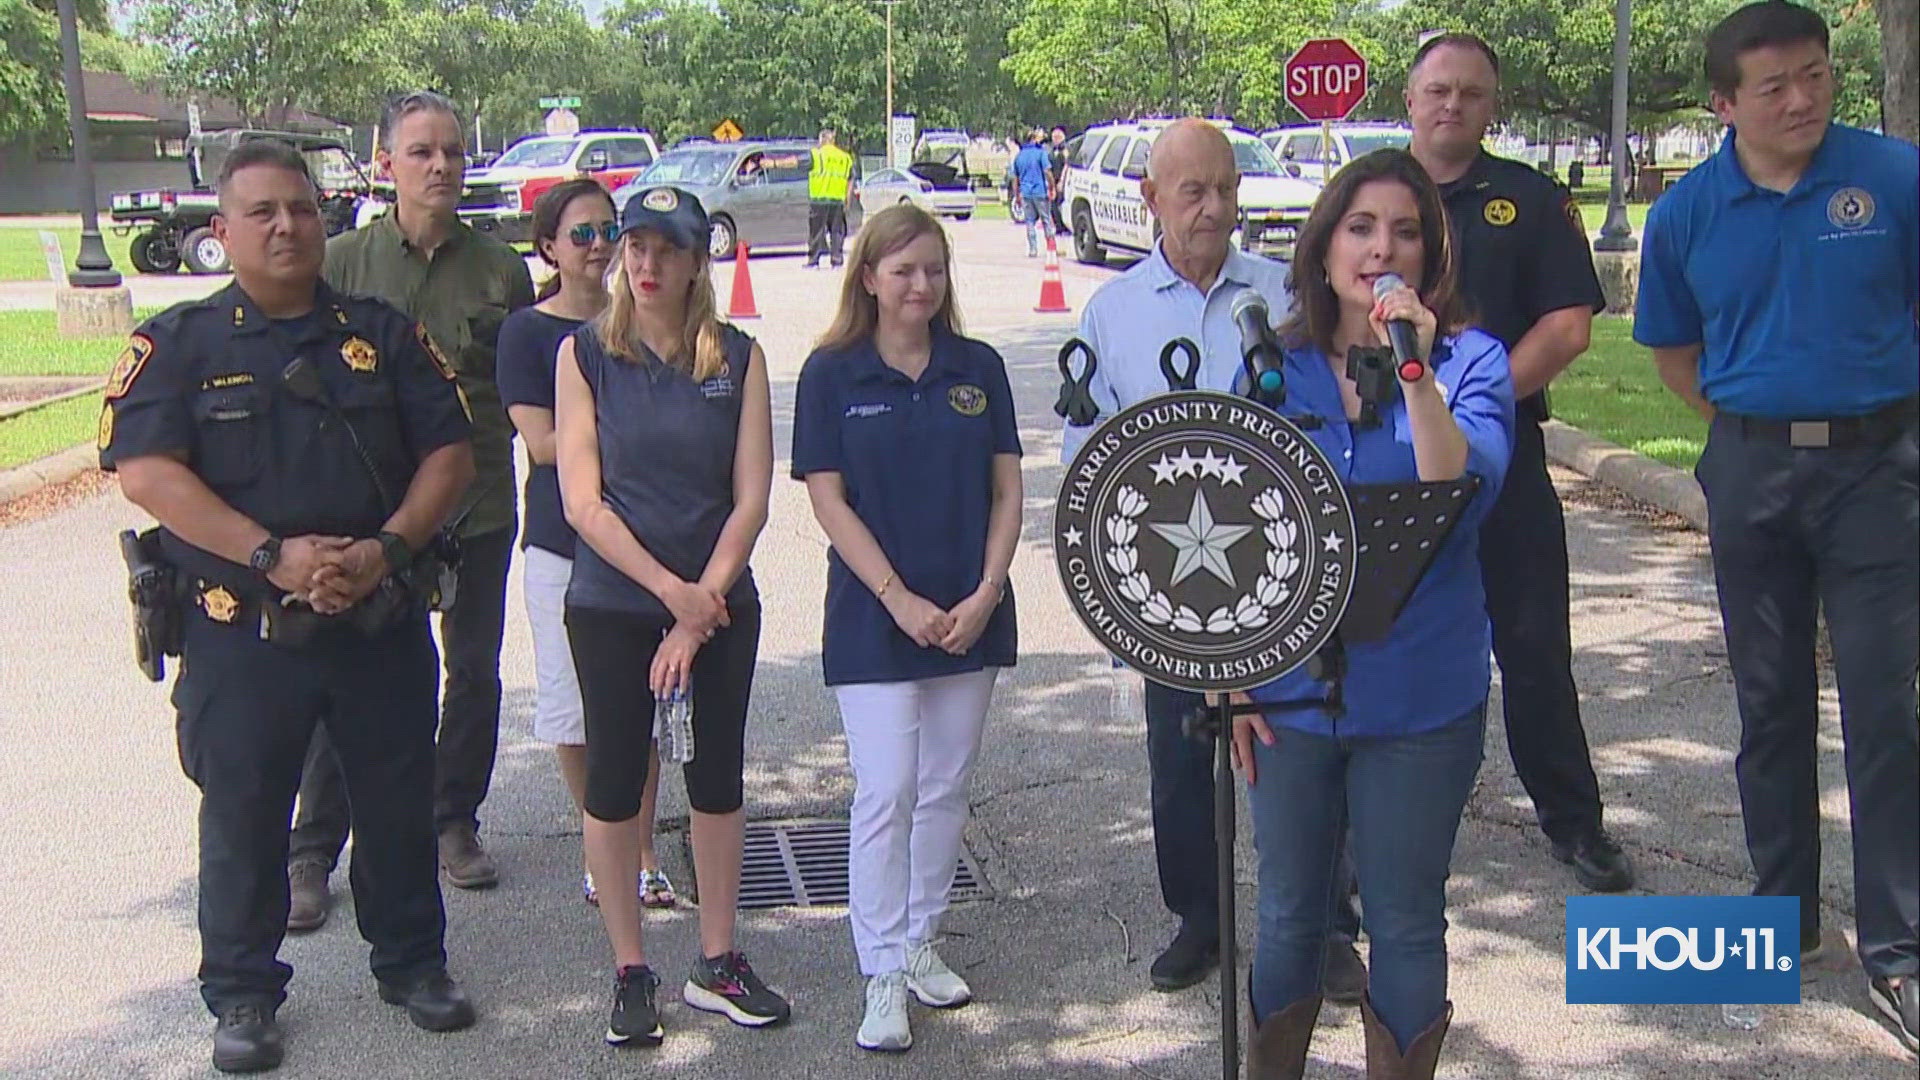 Harris County Precinct 4 Commissioner Lesley Briones, along with Houston Mayor John Whitmire and others gave an update Saturday afternoon.